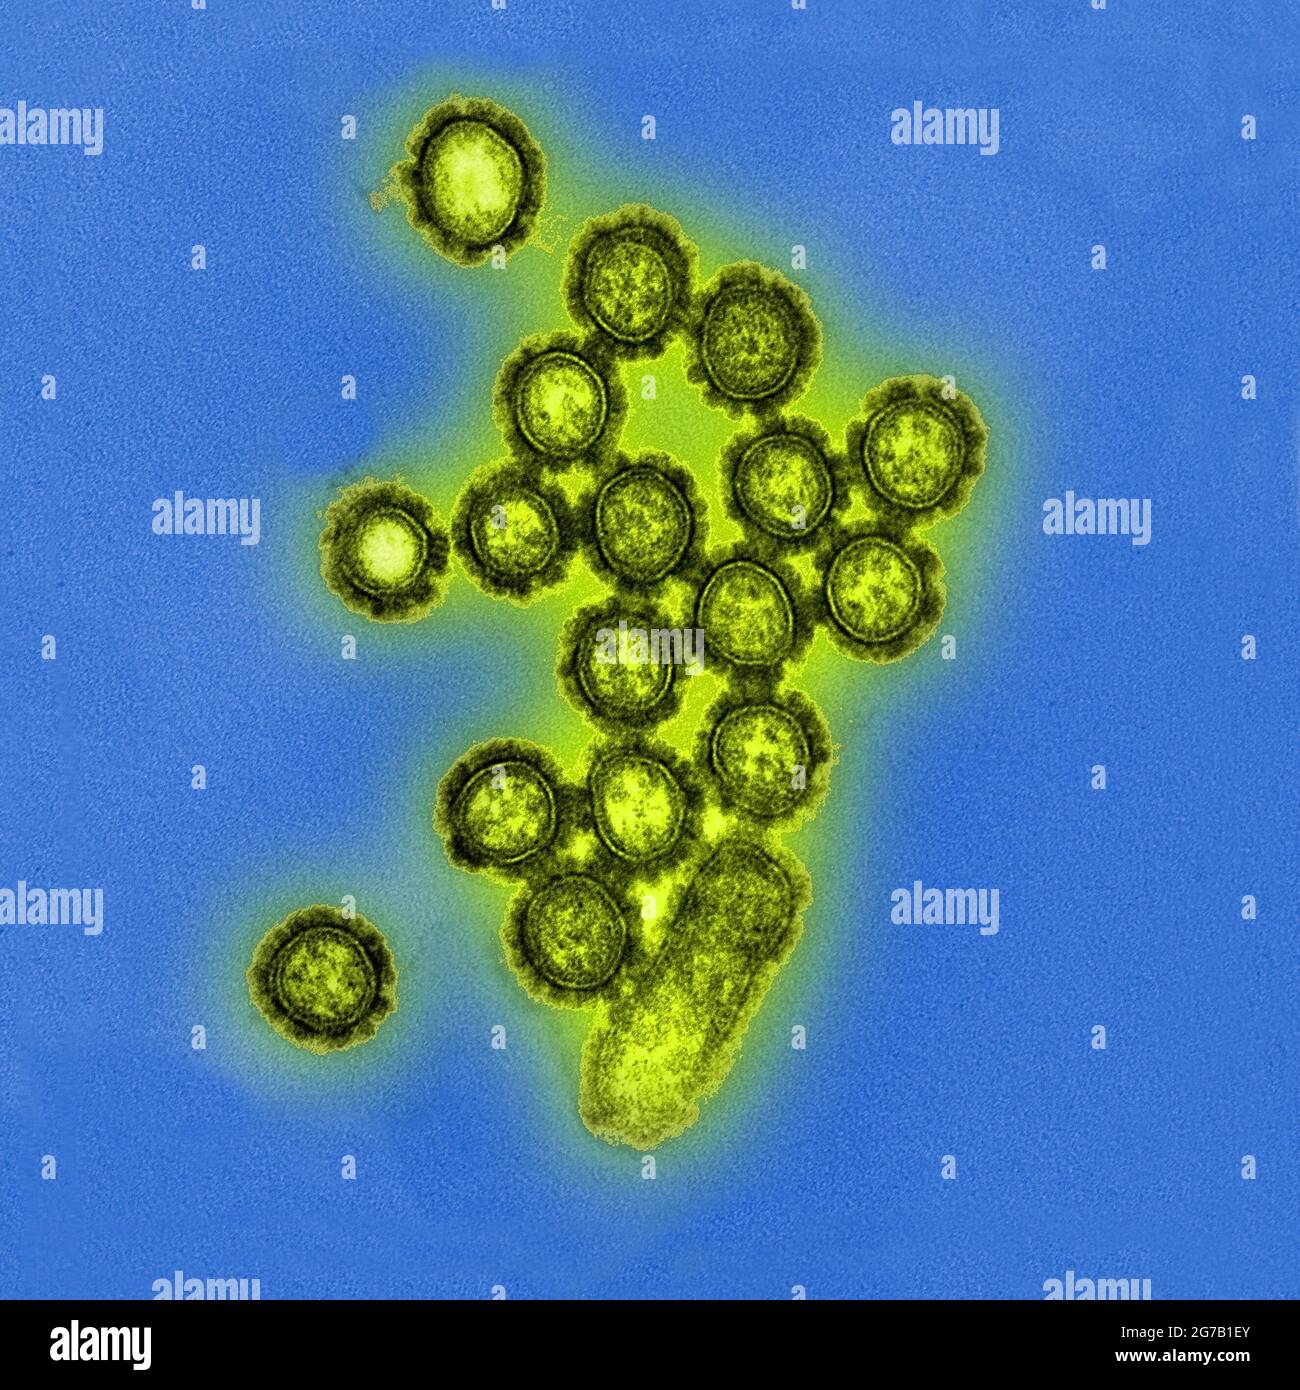 Produced by the US National Institute of Allergy and Infectious Diseases (NIAID), this digitally colorized transmission electron microscopic (TEM) image, depicts numbers of H1N1 influenza virus particles. Surface proteins located on the surface of the virus particles are shown in black.  An optimised and enhanced version of an image produced by the US National Institute of Allergy and Infectious Diseases / Credit: NIAID Stock Photo